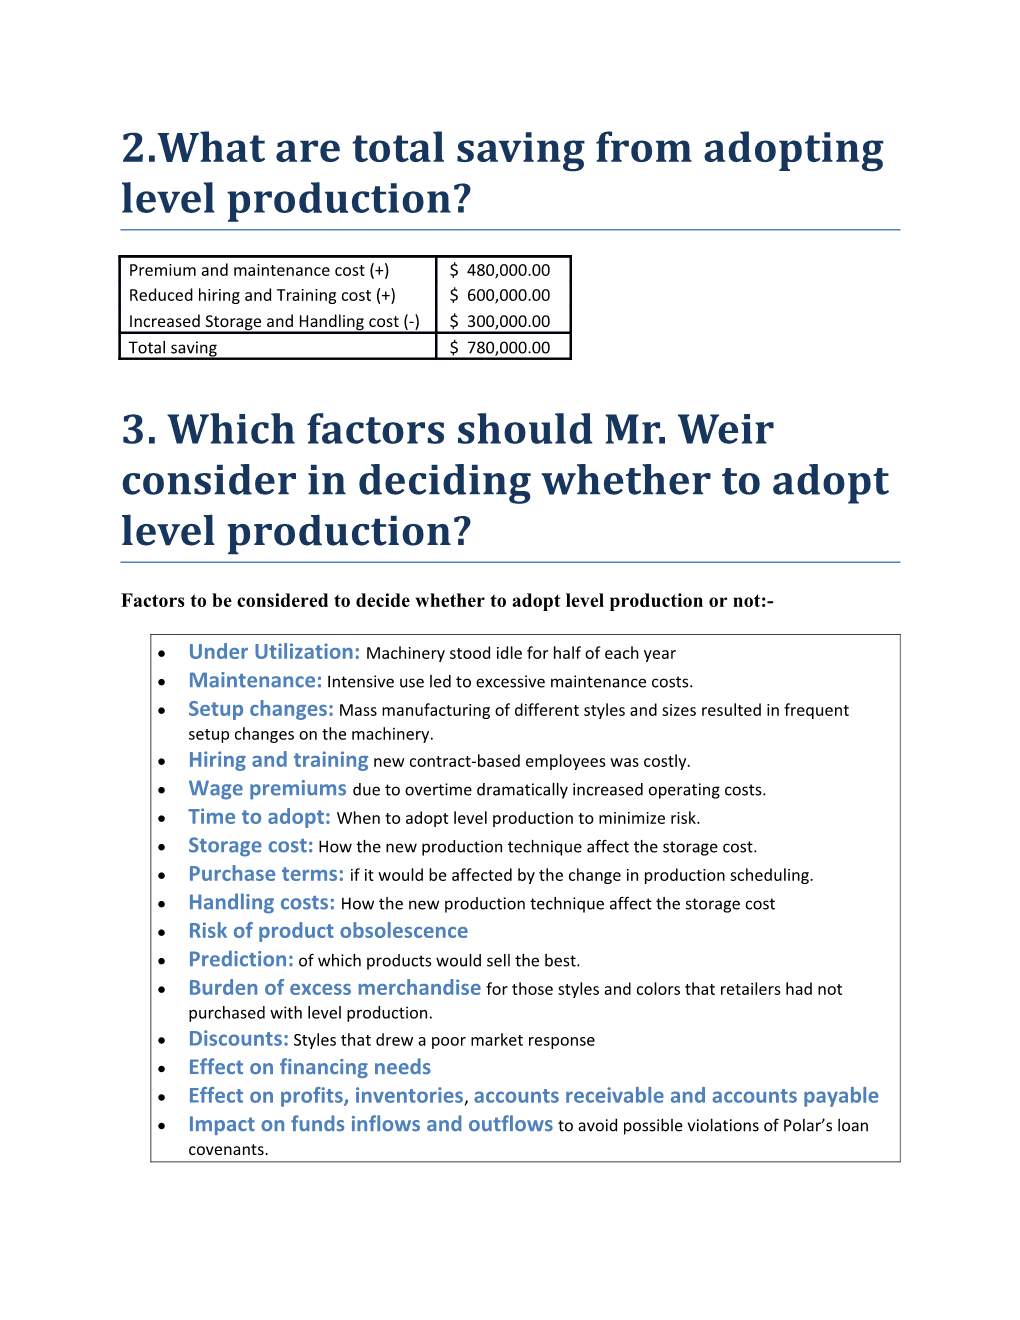 2.What Are Total Saving from Adopting Level Production?